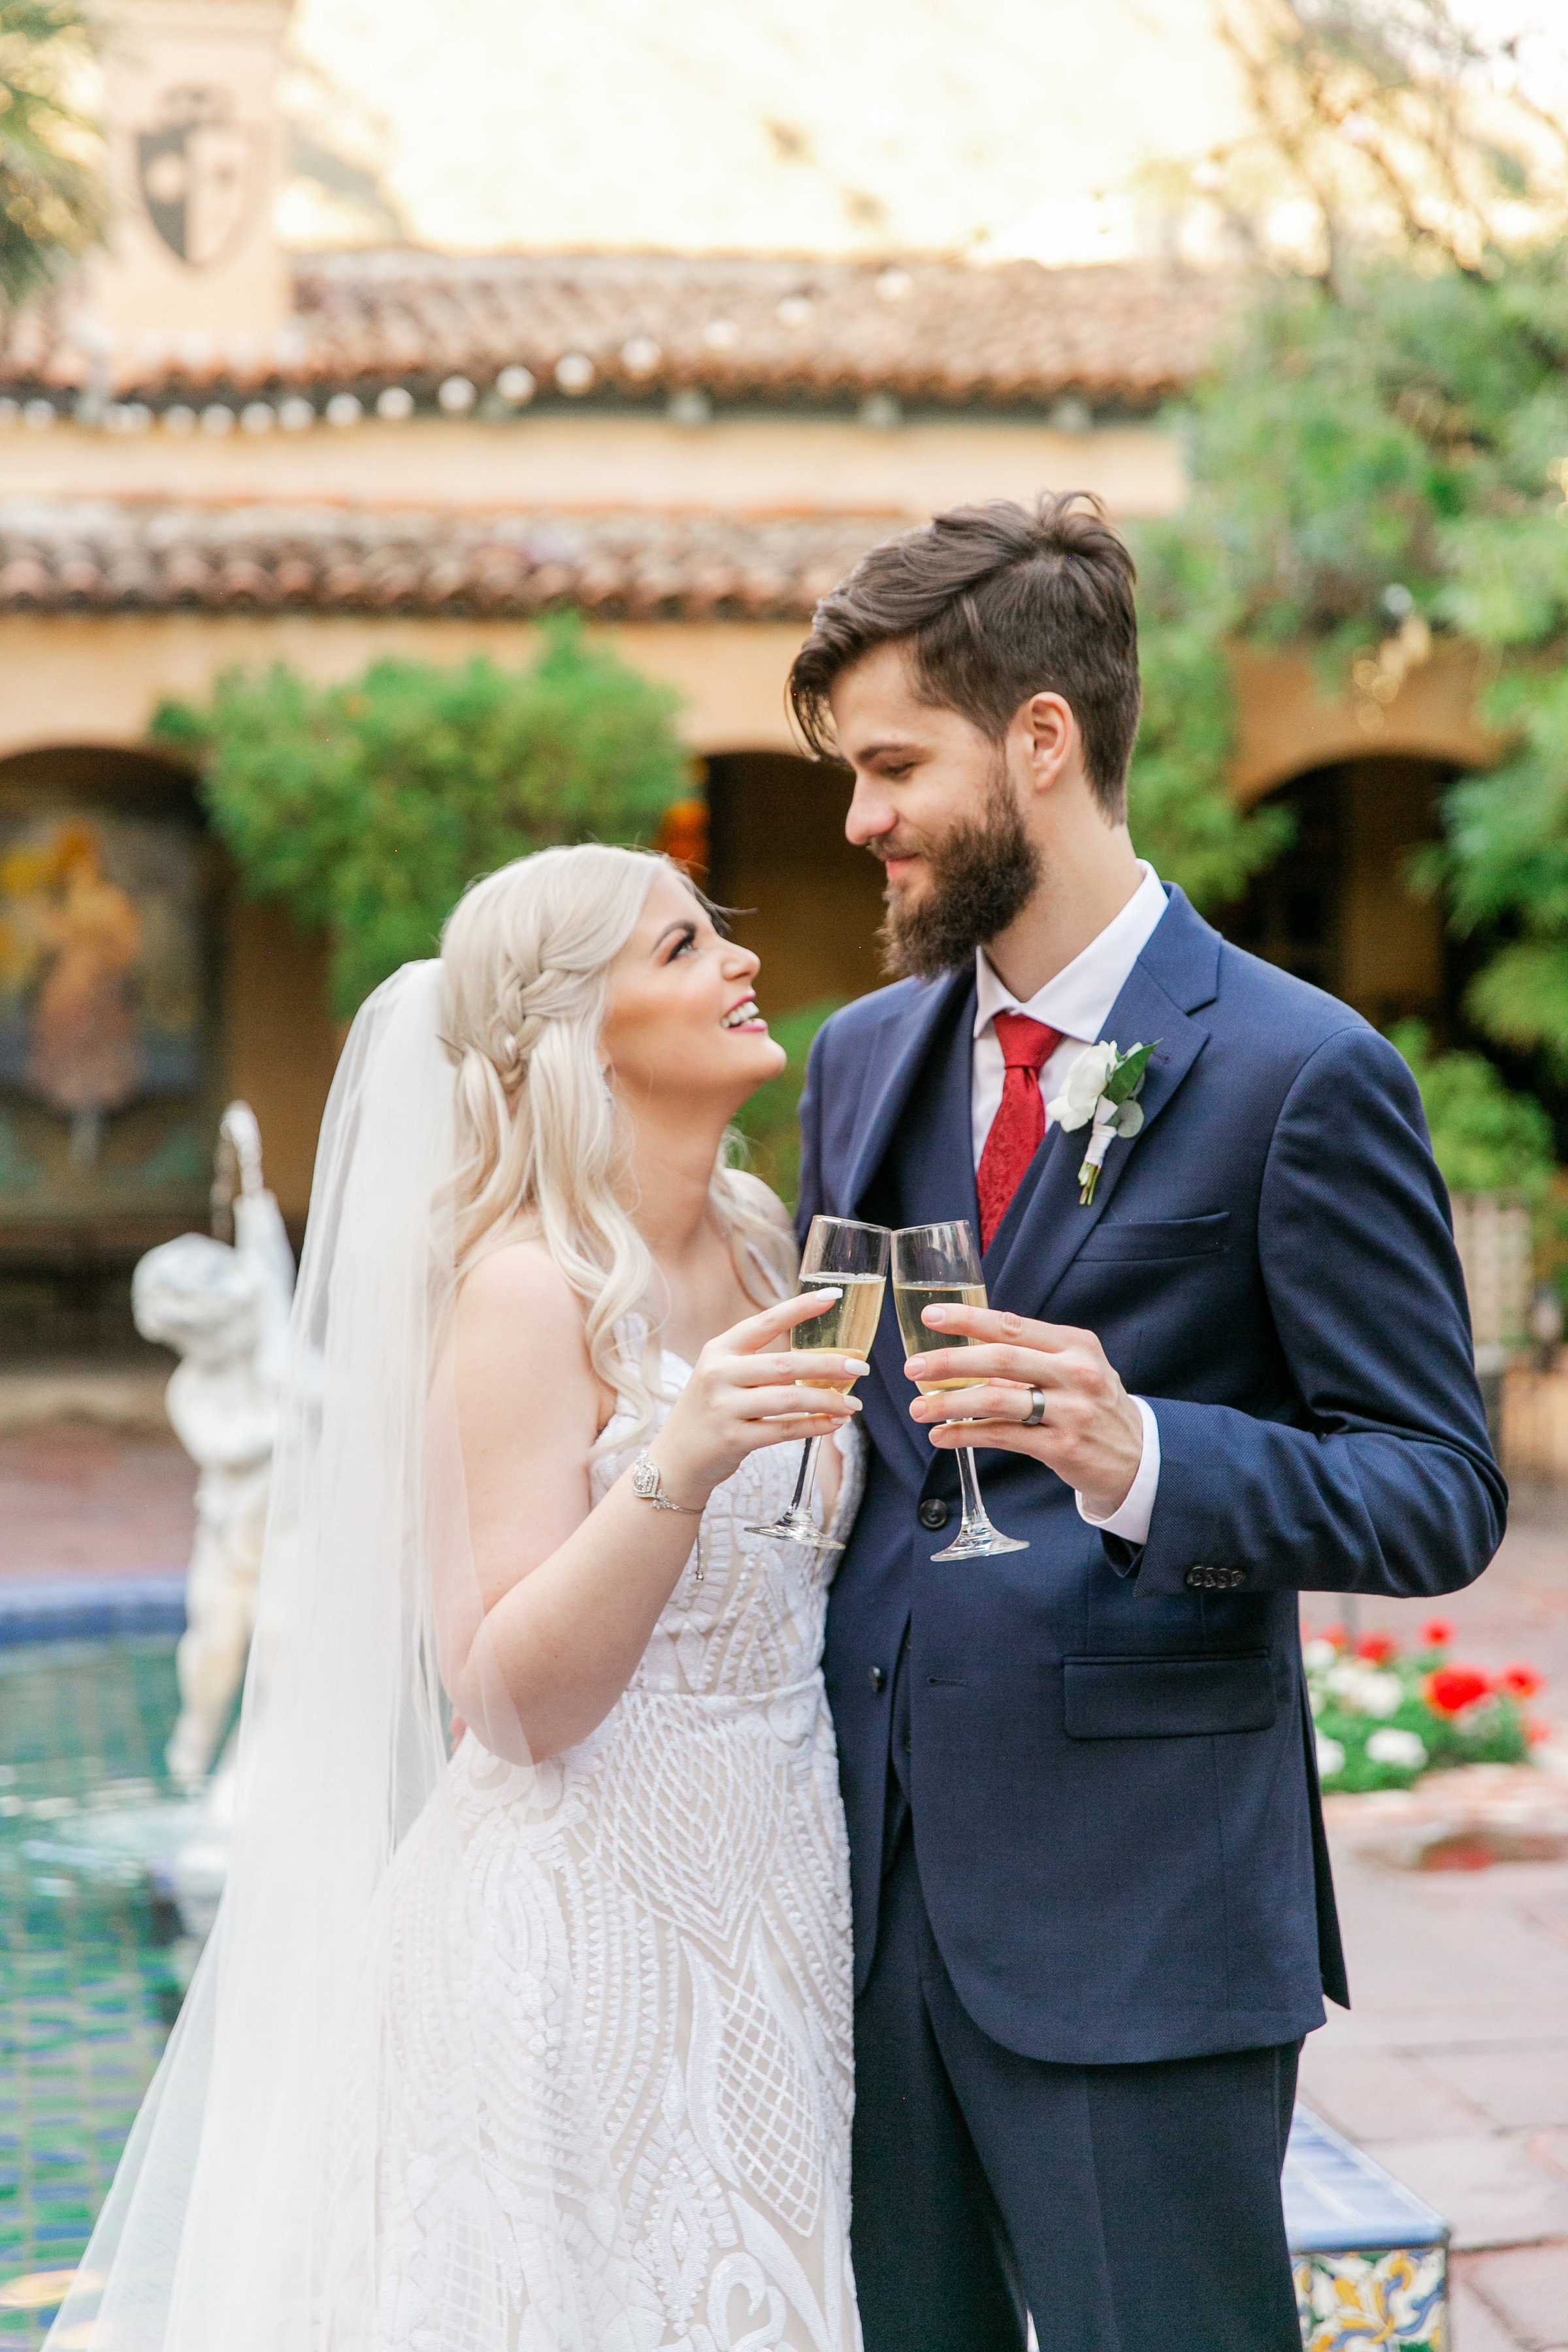 Karlie Colleen Photography - The Royal Palms Wedding - Some Like It Classic - Alex & Sam-597